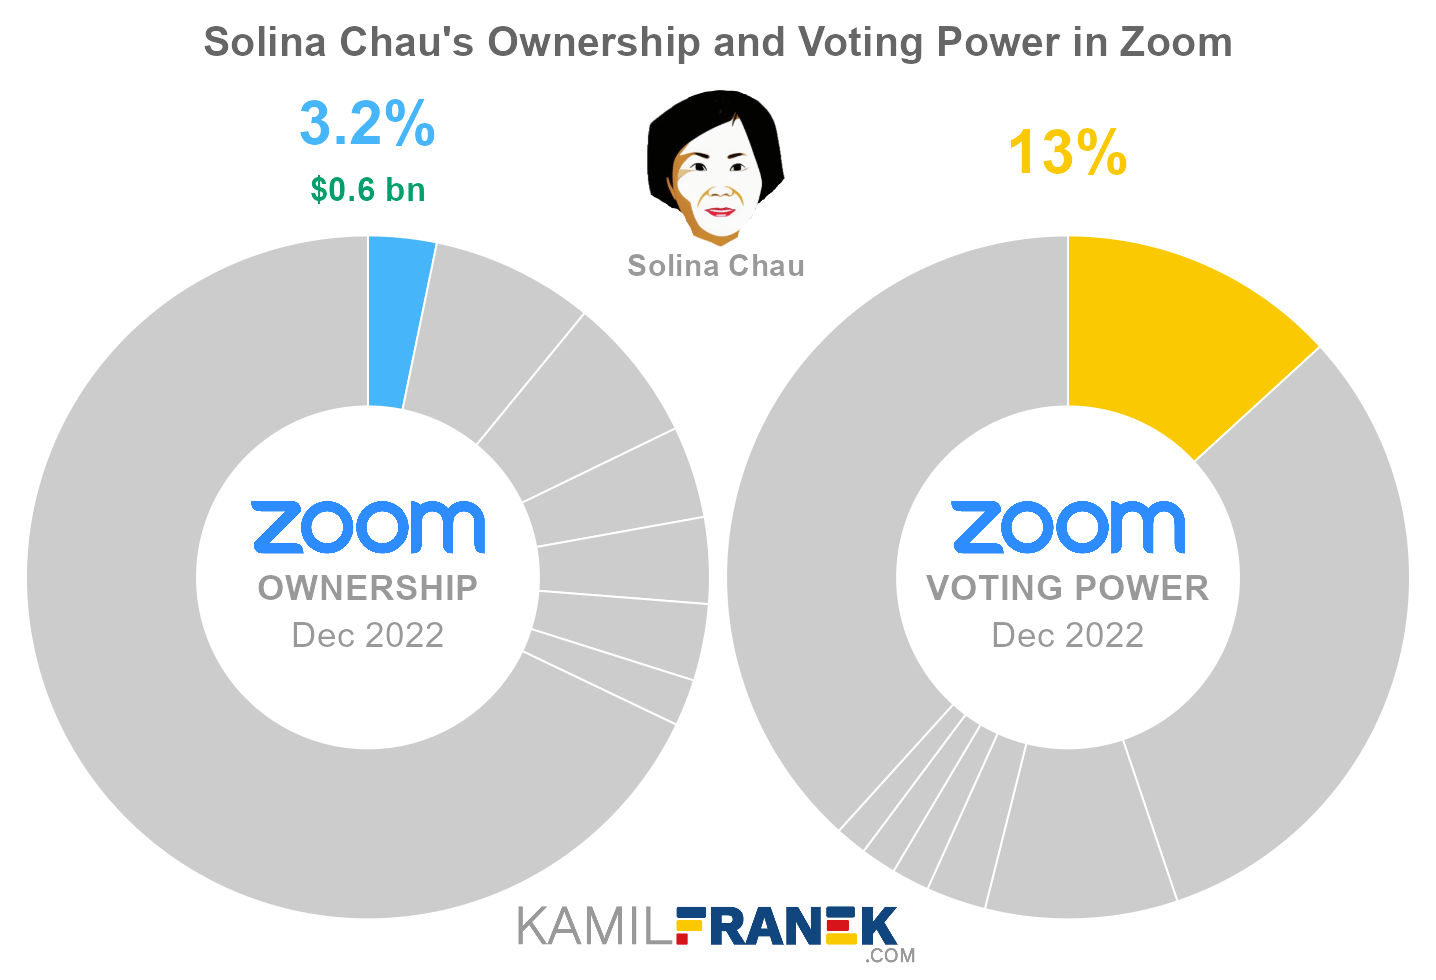 Solina Chau's share ownership and voting power in Zoom (chart)